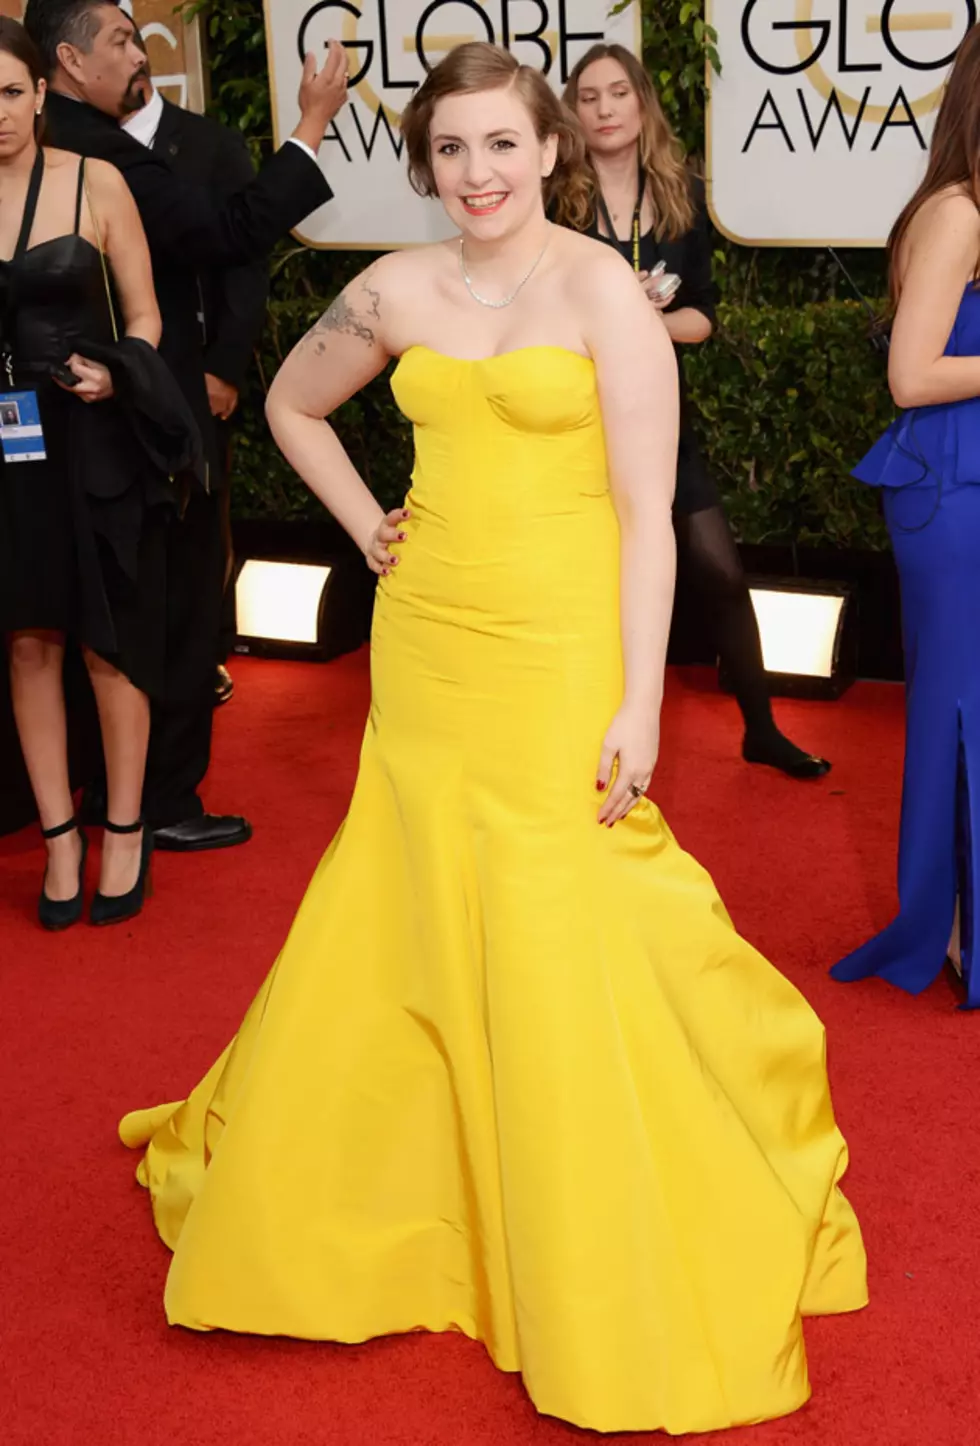 Lena Dunham Goes for a Gold Dress on the 2014 Golden Globes Red Carpet [PHOTOS]